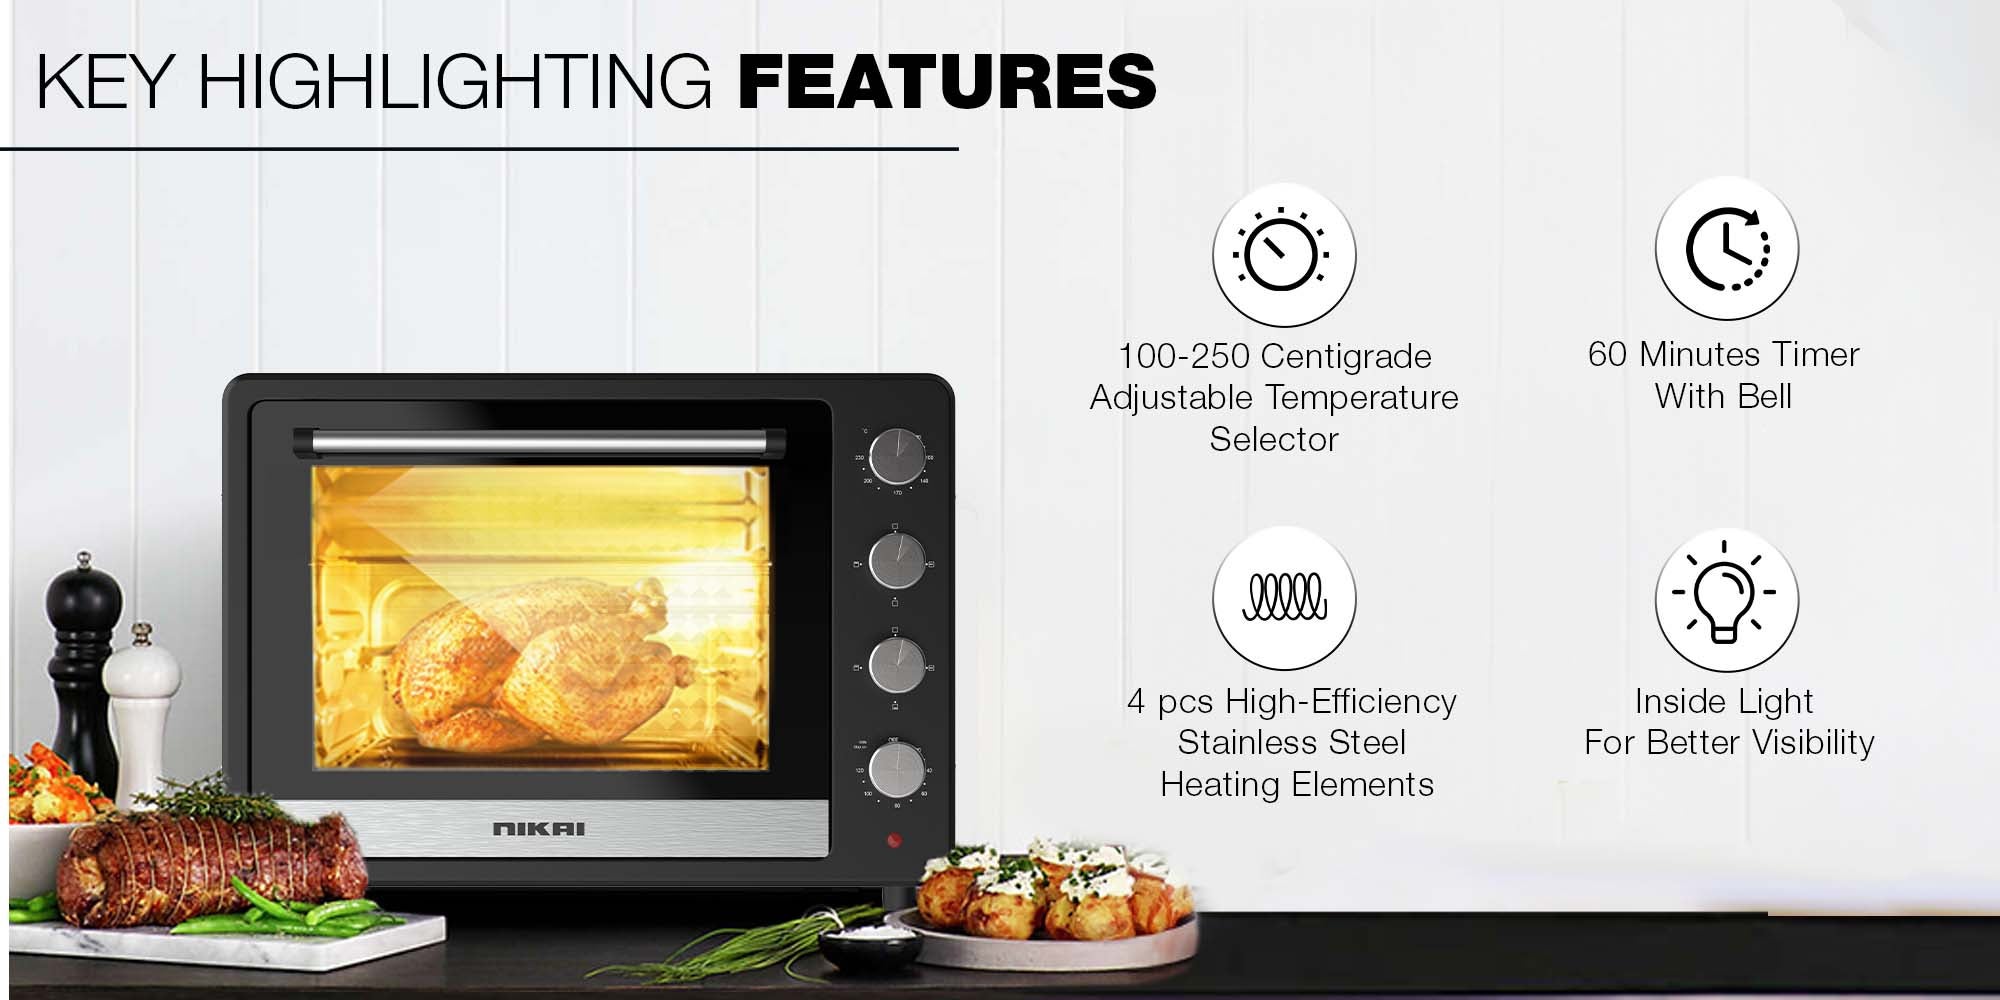 Electric Oven, , Adjustable Temperature, 4 Stages Heating, 60-Min Timer With Bell, High-Efficiency S.S. Heating, Rotisserie And Convection, Inside Light, Keep Warm Function 65 L 2200 W NT6500SRC2 Black